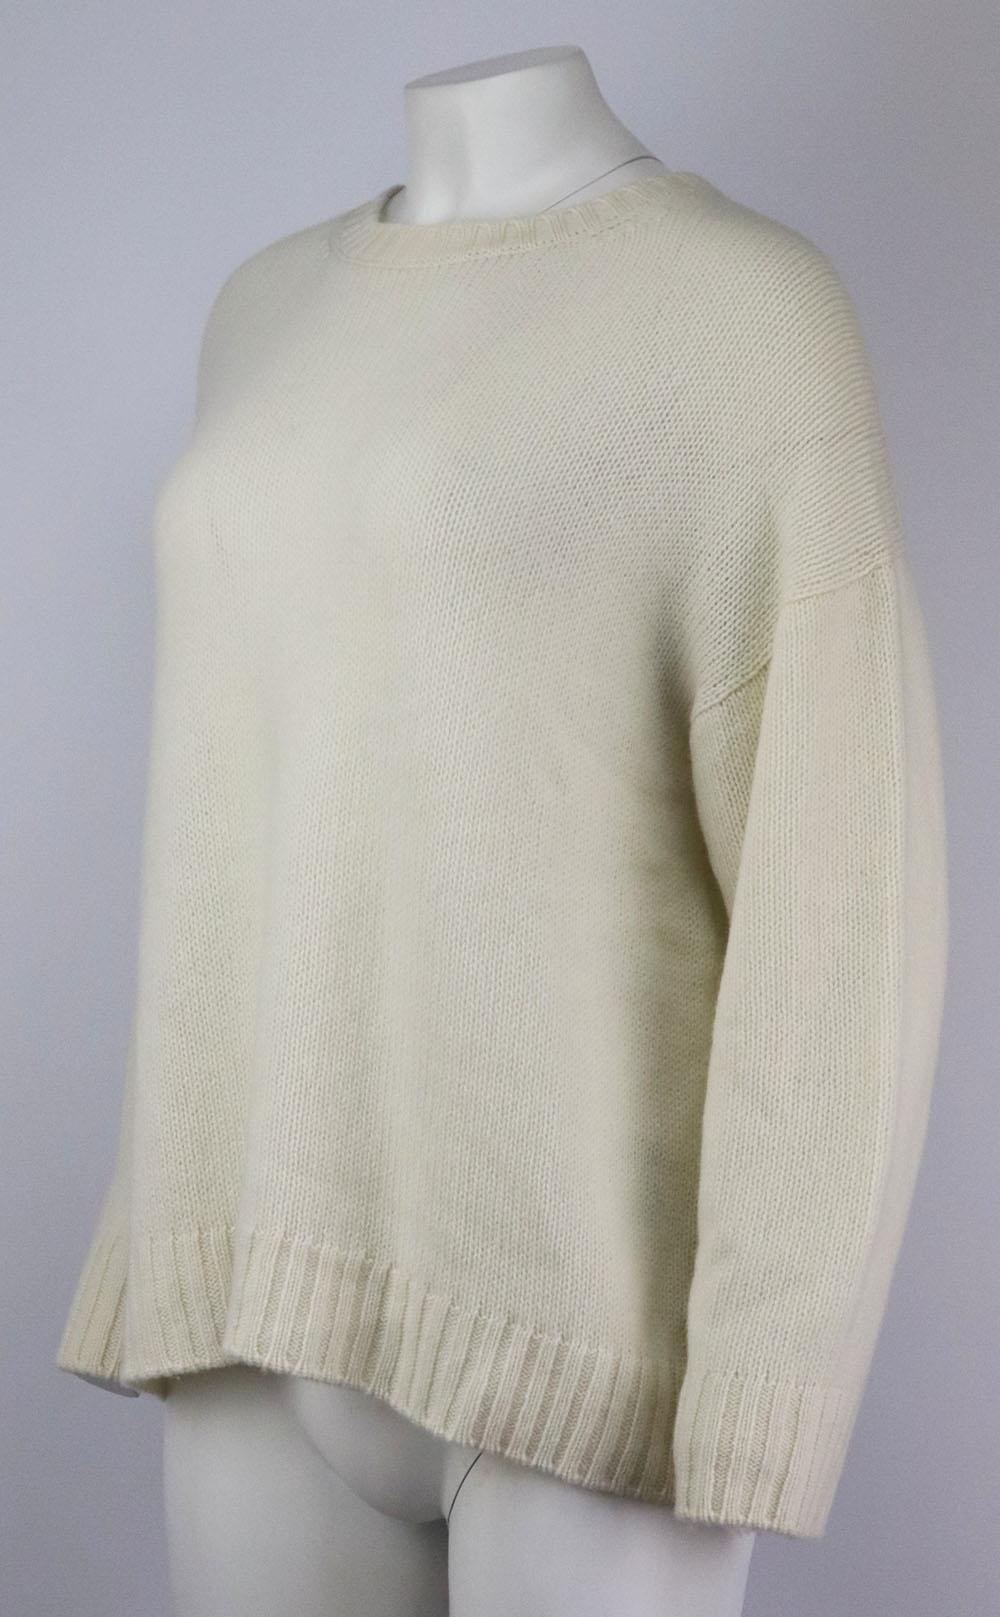 This ‘J’Adior 8’ sweater by Christian Dior is knitted from sumptuously soft ivory cashmere, this sweater has the brand’s motif on the back in black and ribbed trims. Ivory cashmere. Slips on. 100% Cashmere. Size: FR 42 (UK 14, US 10, IT 46). Bust